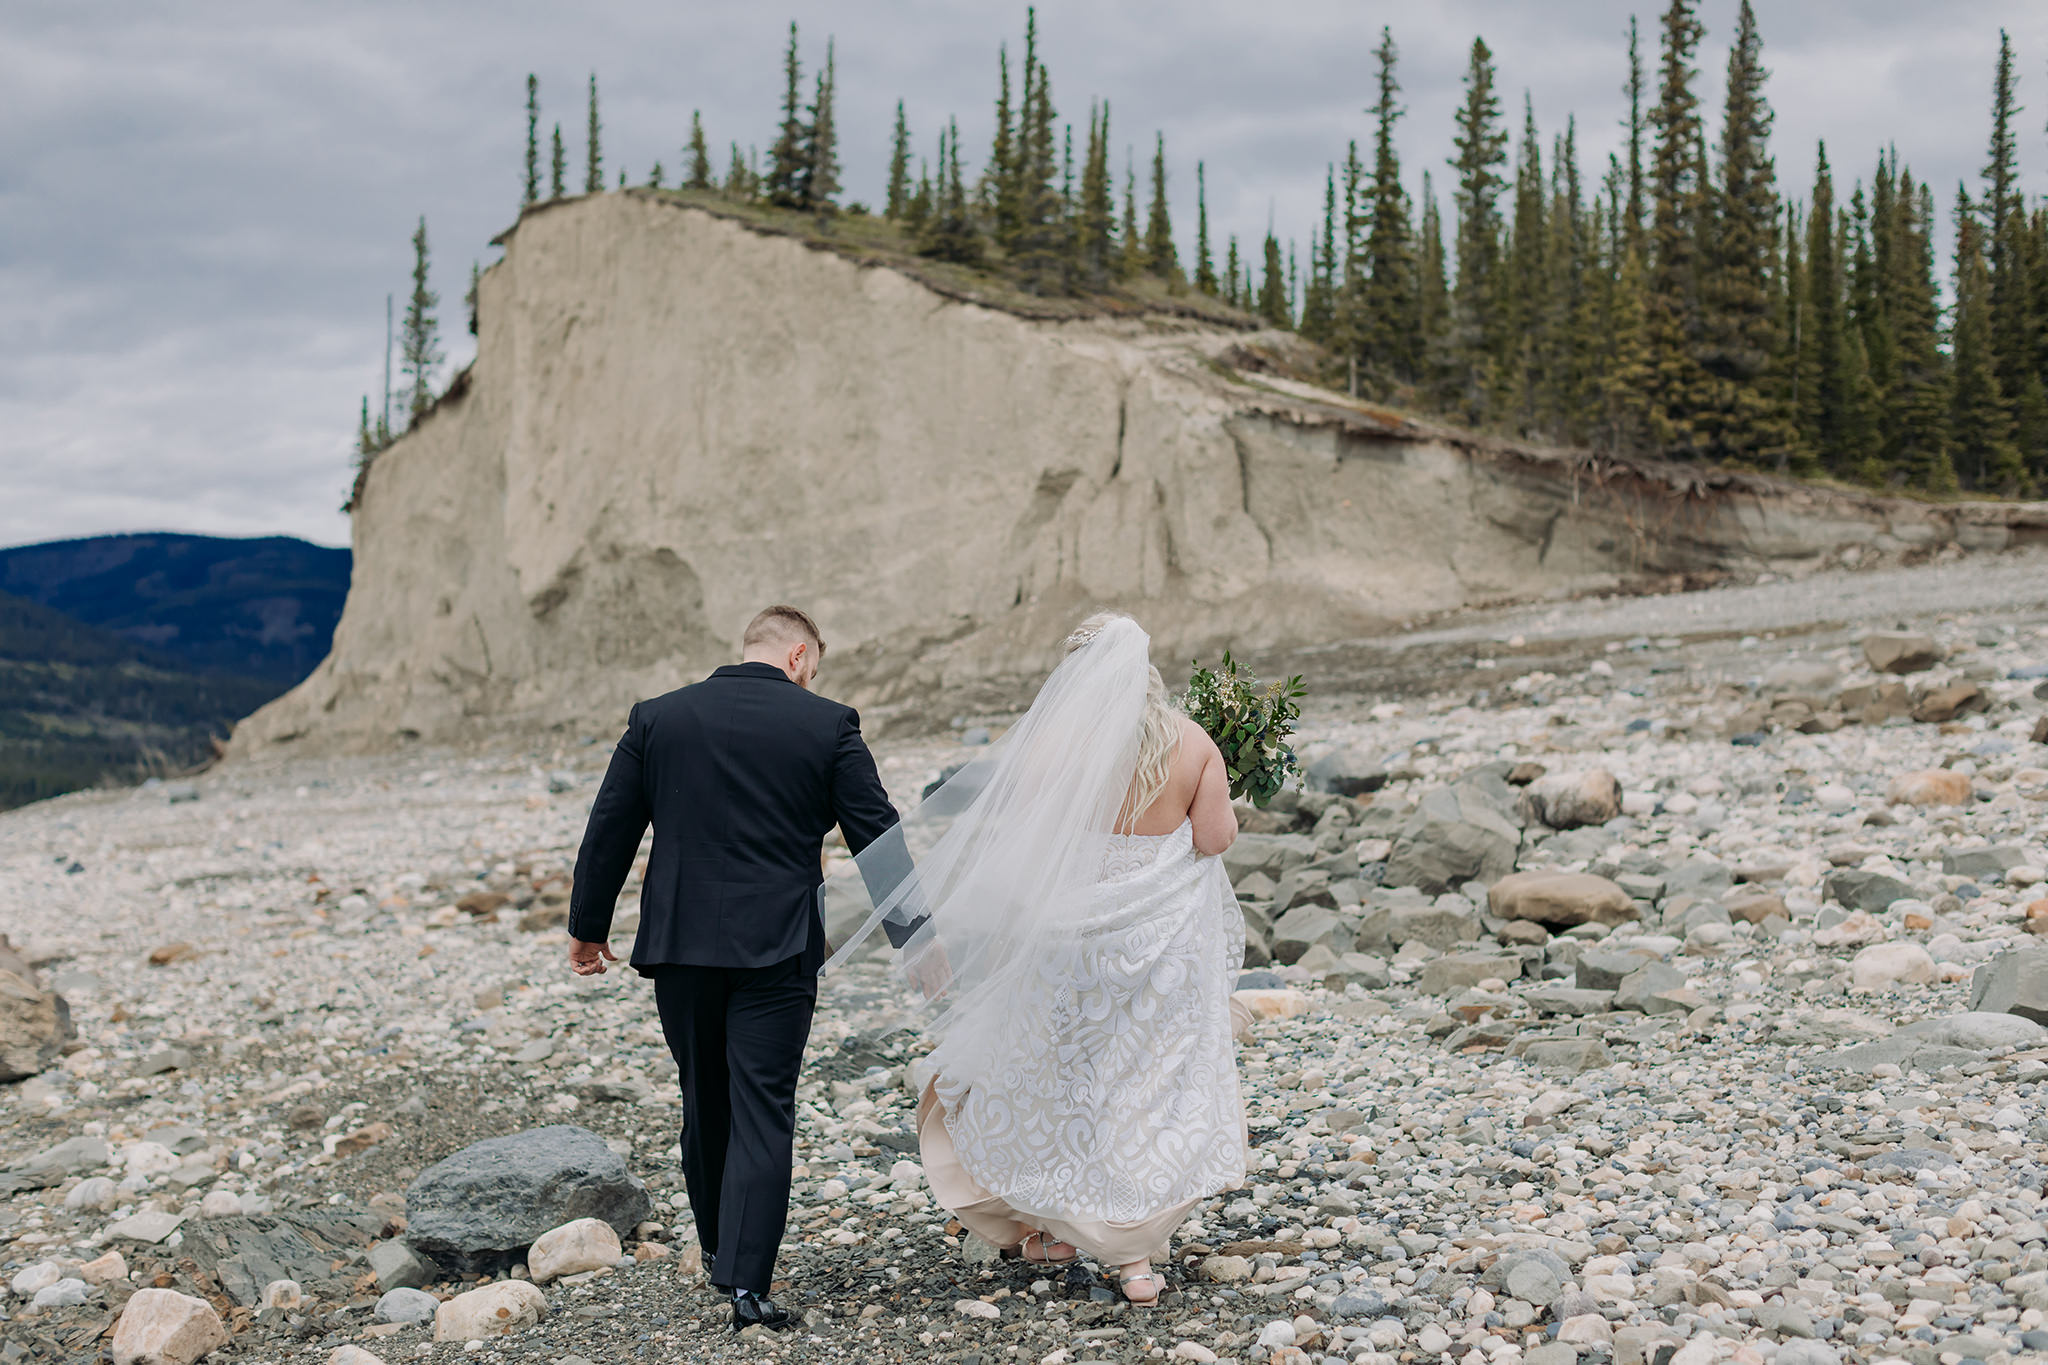 Abraham Lake Spring Mountain wedding with outdoor wedding portraits blue waters & mountains in the distance